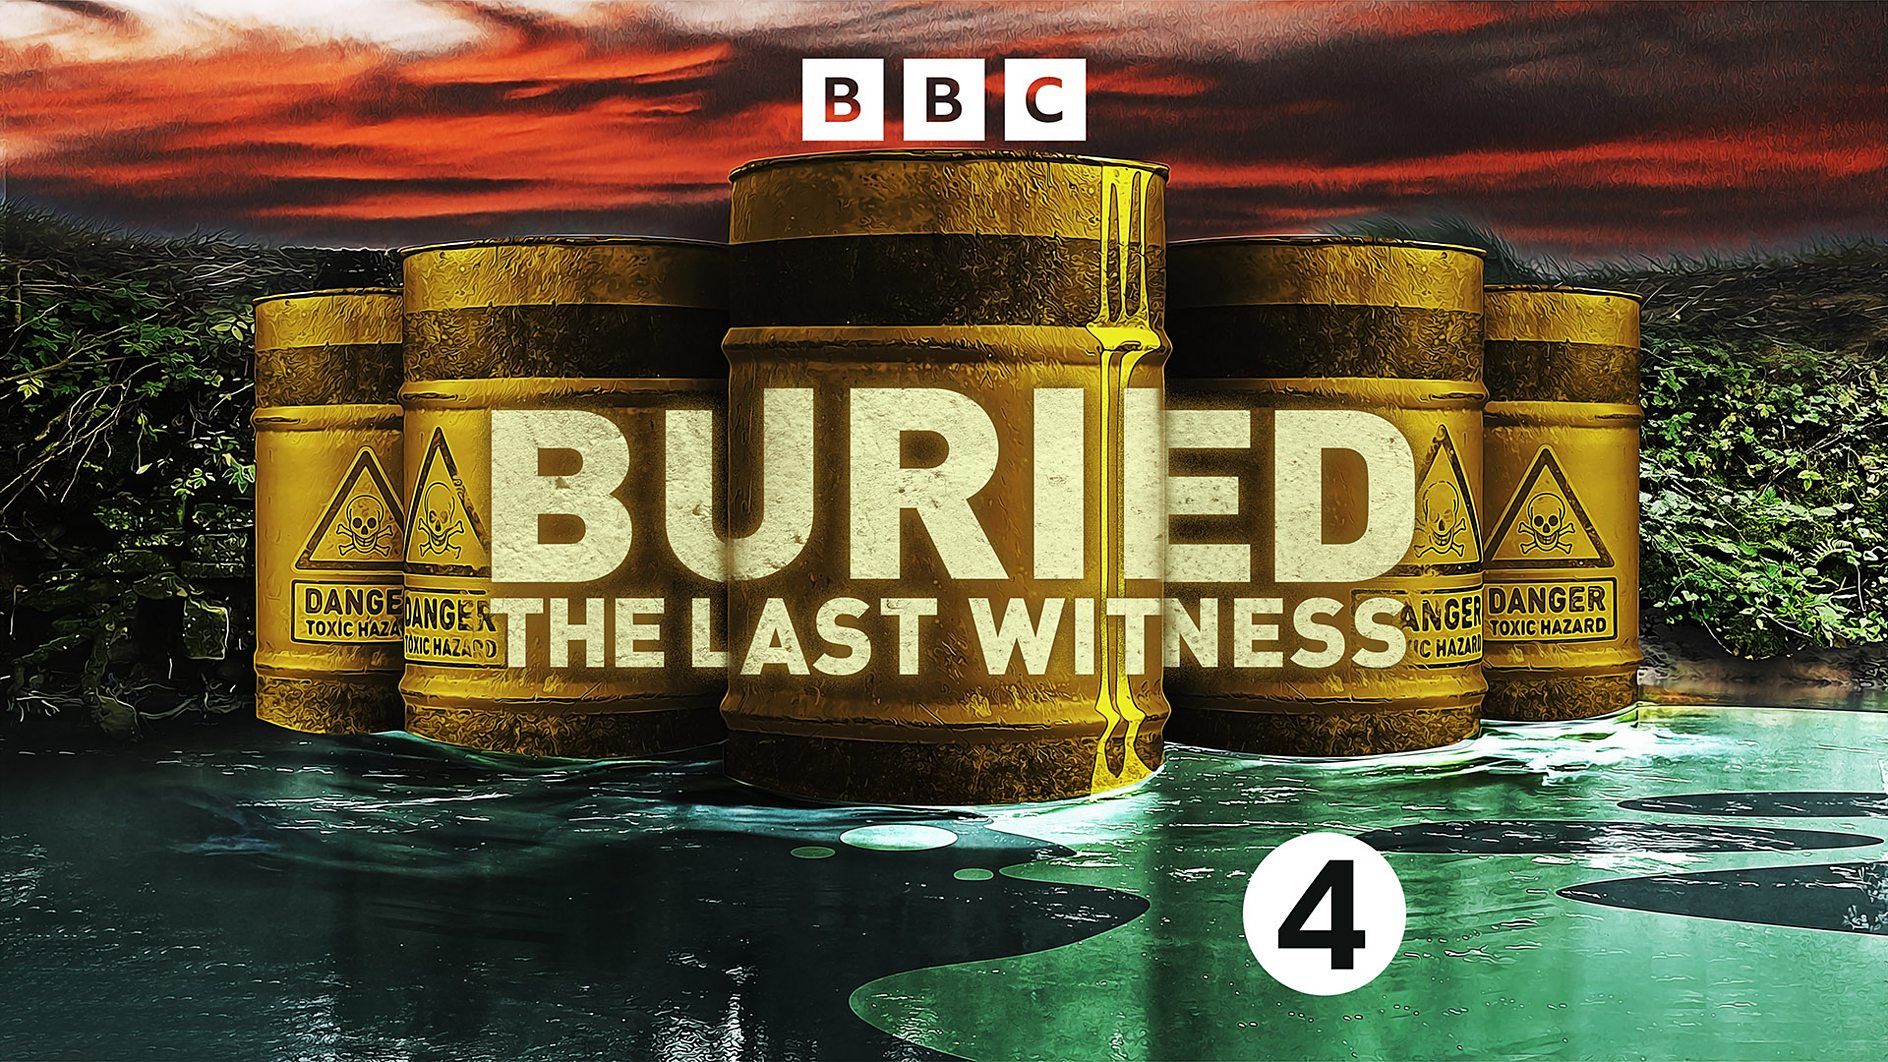 BBC Radio 4’s ‘Buried’ finds toxic chemicals in soil, food and human blood